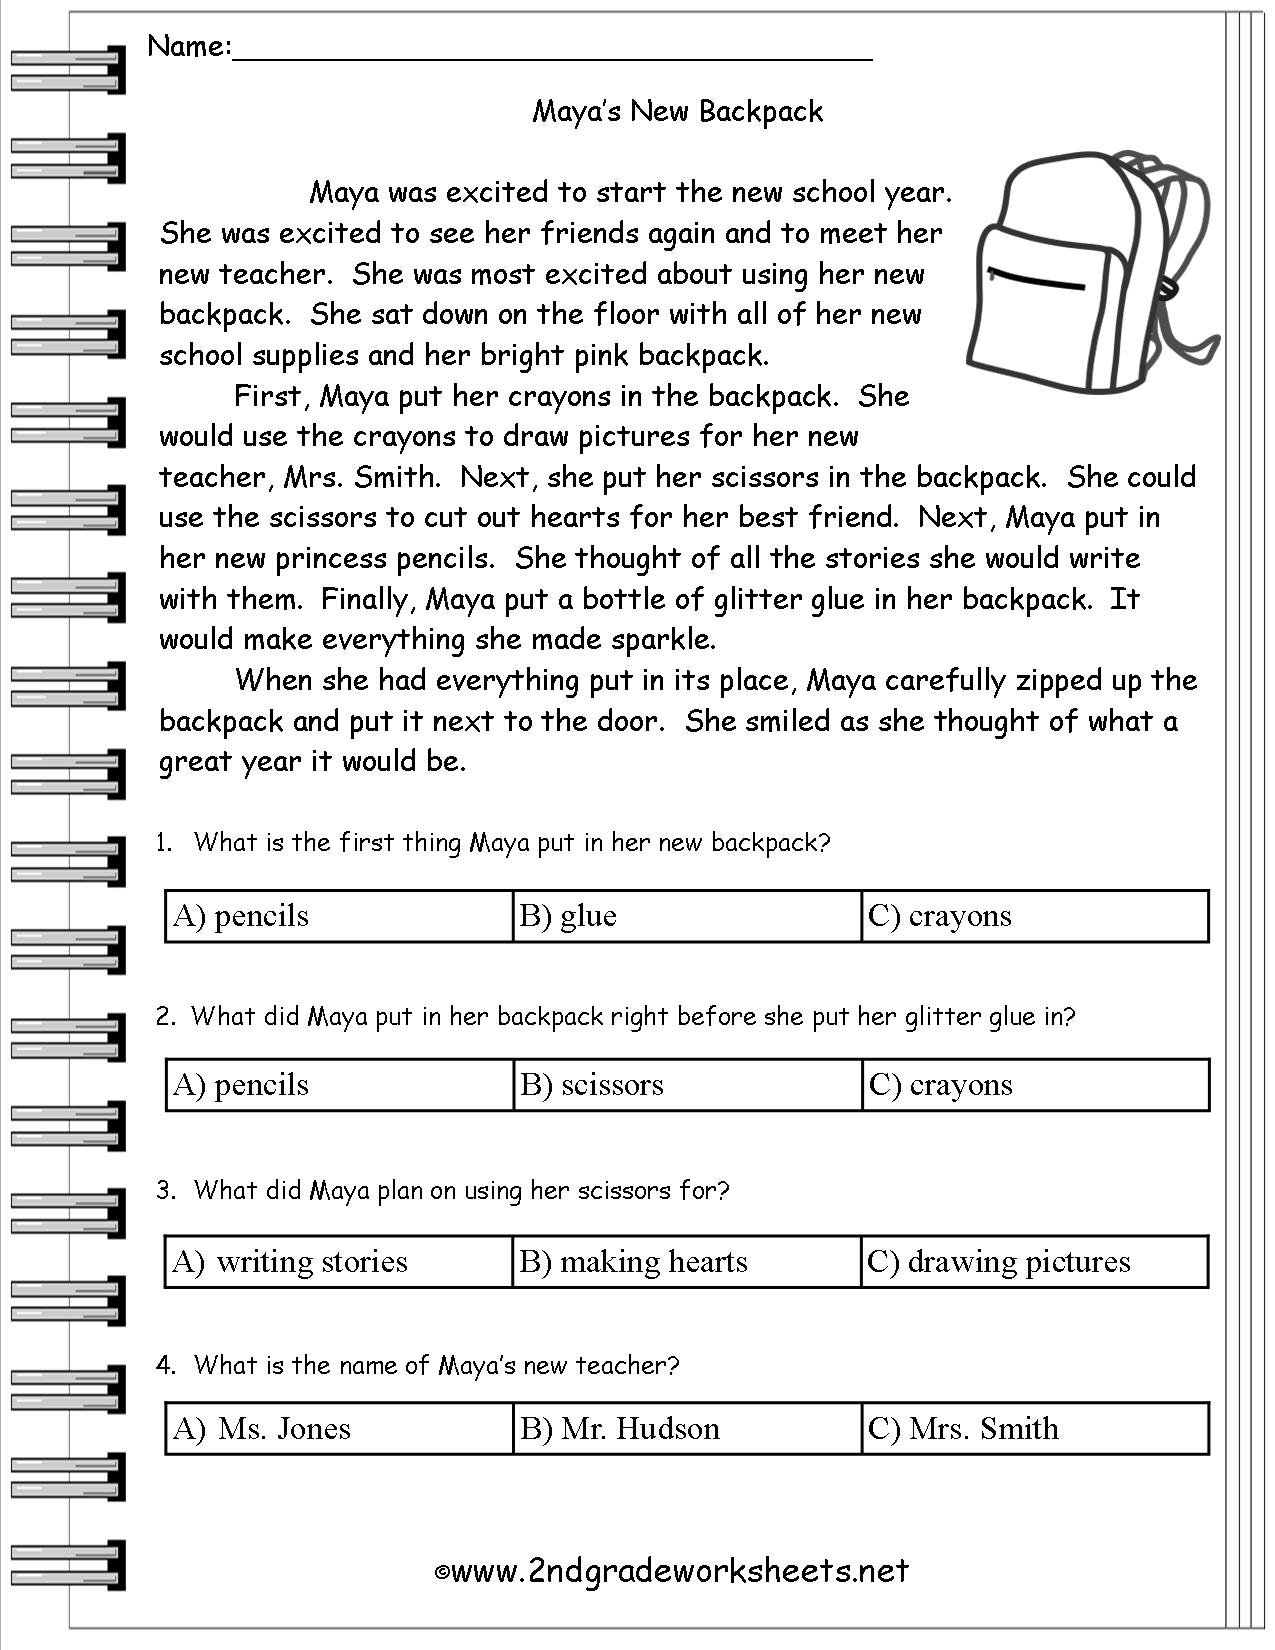 Free Back To School Worksheets And Printouts As Well As Fun Summer Worksheets For 4Th Grade